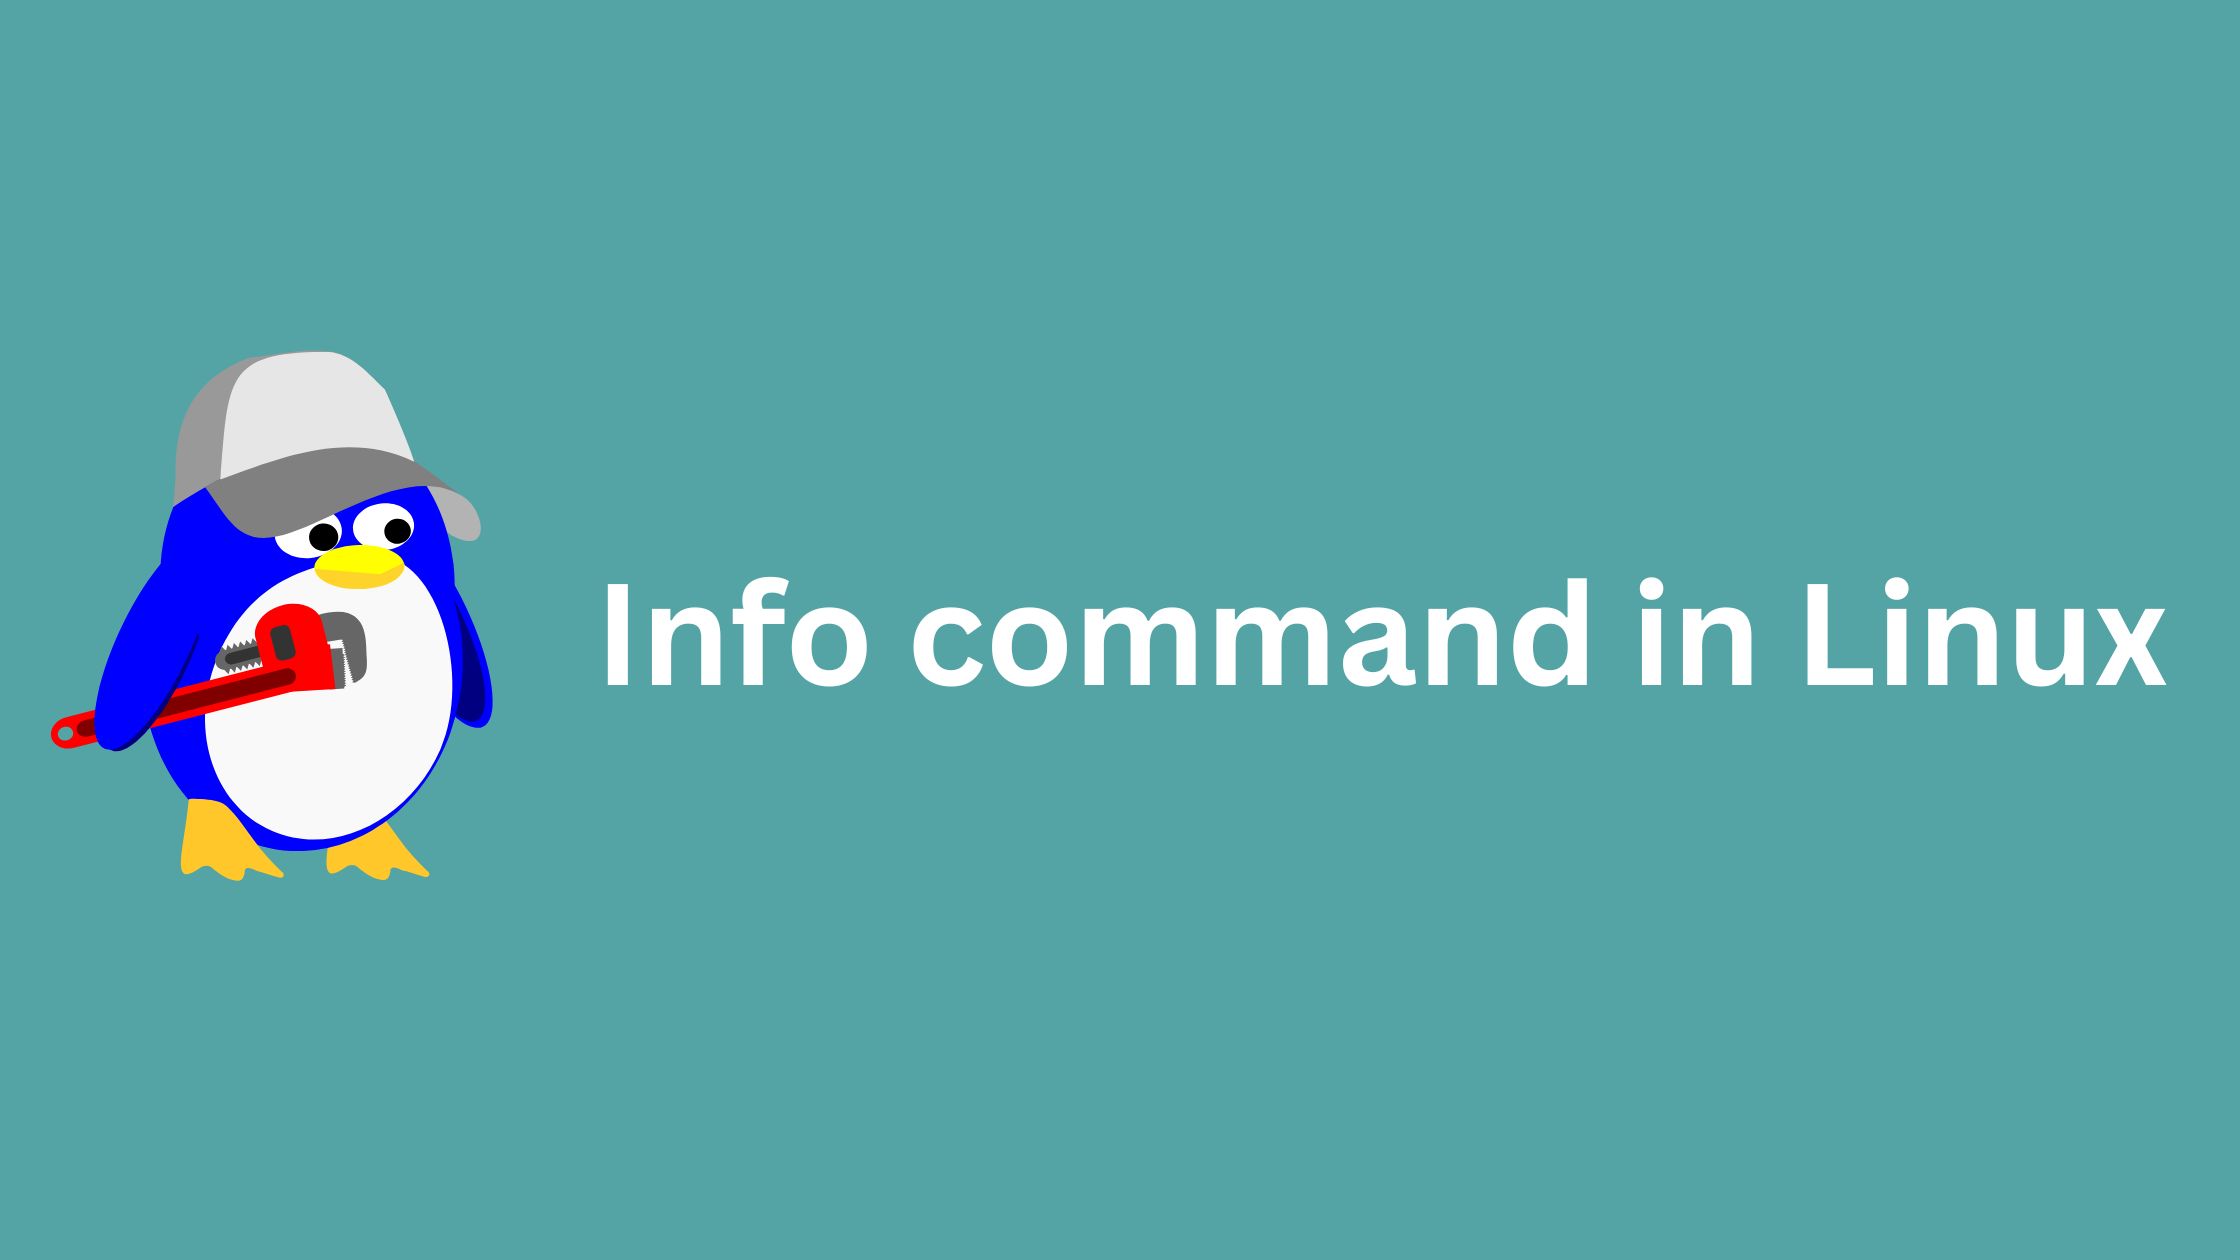 info command in linux